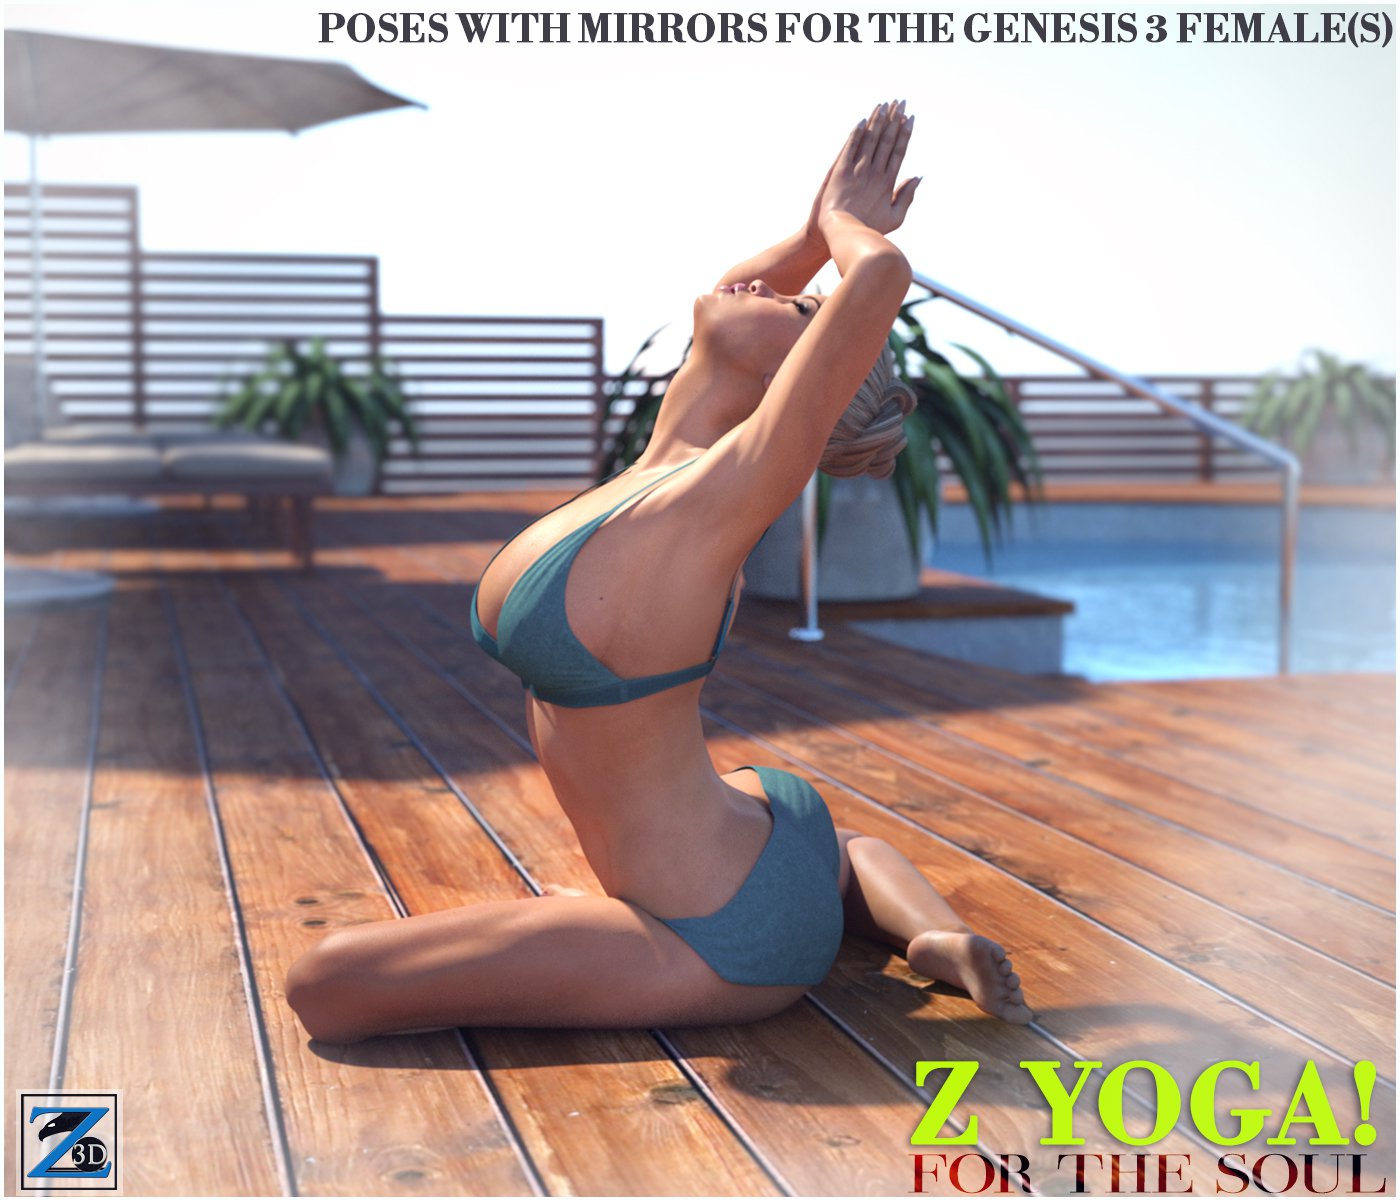 Z Yoga For The Soul – Poses for Genesis 3 Female(s) [REPOST]